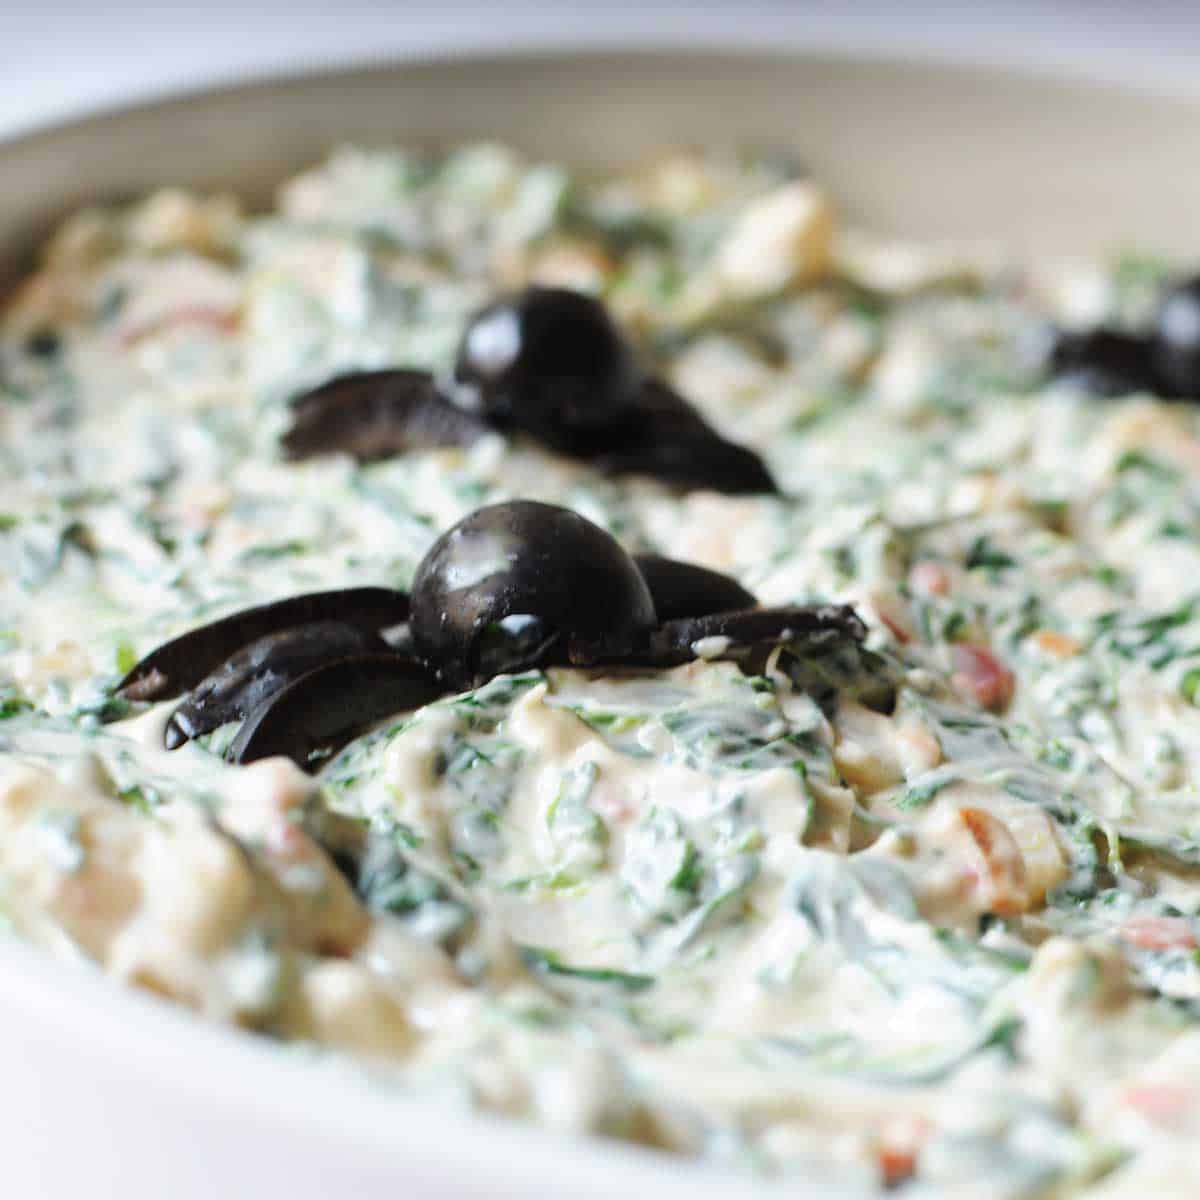 Halloween spinach dip with black olive spiders on top.